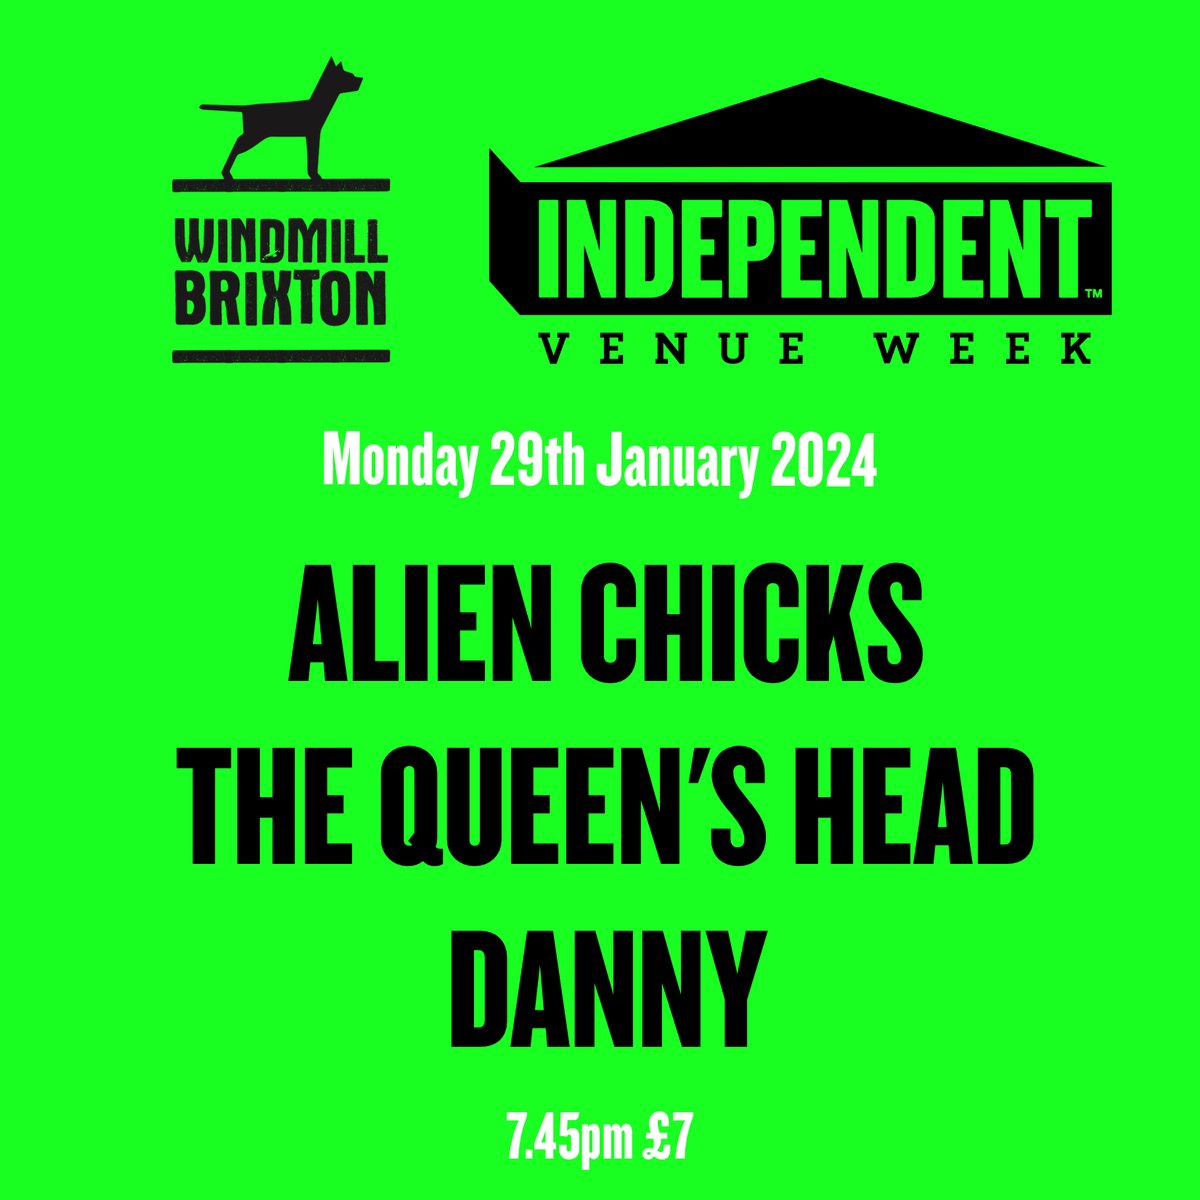 It's really nice to open #IVW24 week with a headline from the most local of bands, punky powerhouse trio @alienchicksband. Plus more venue regulars in @GODSAVETQH and then there's DANNY the hyper rap sensation. Don't miss him. Only a handful of tickets left for this one.